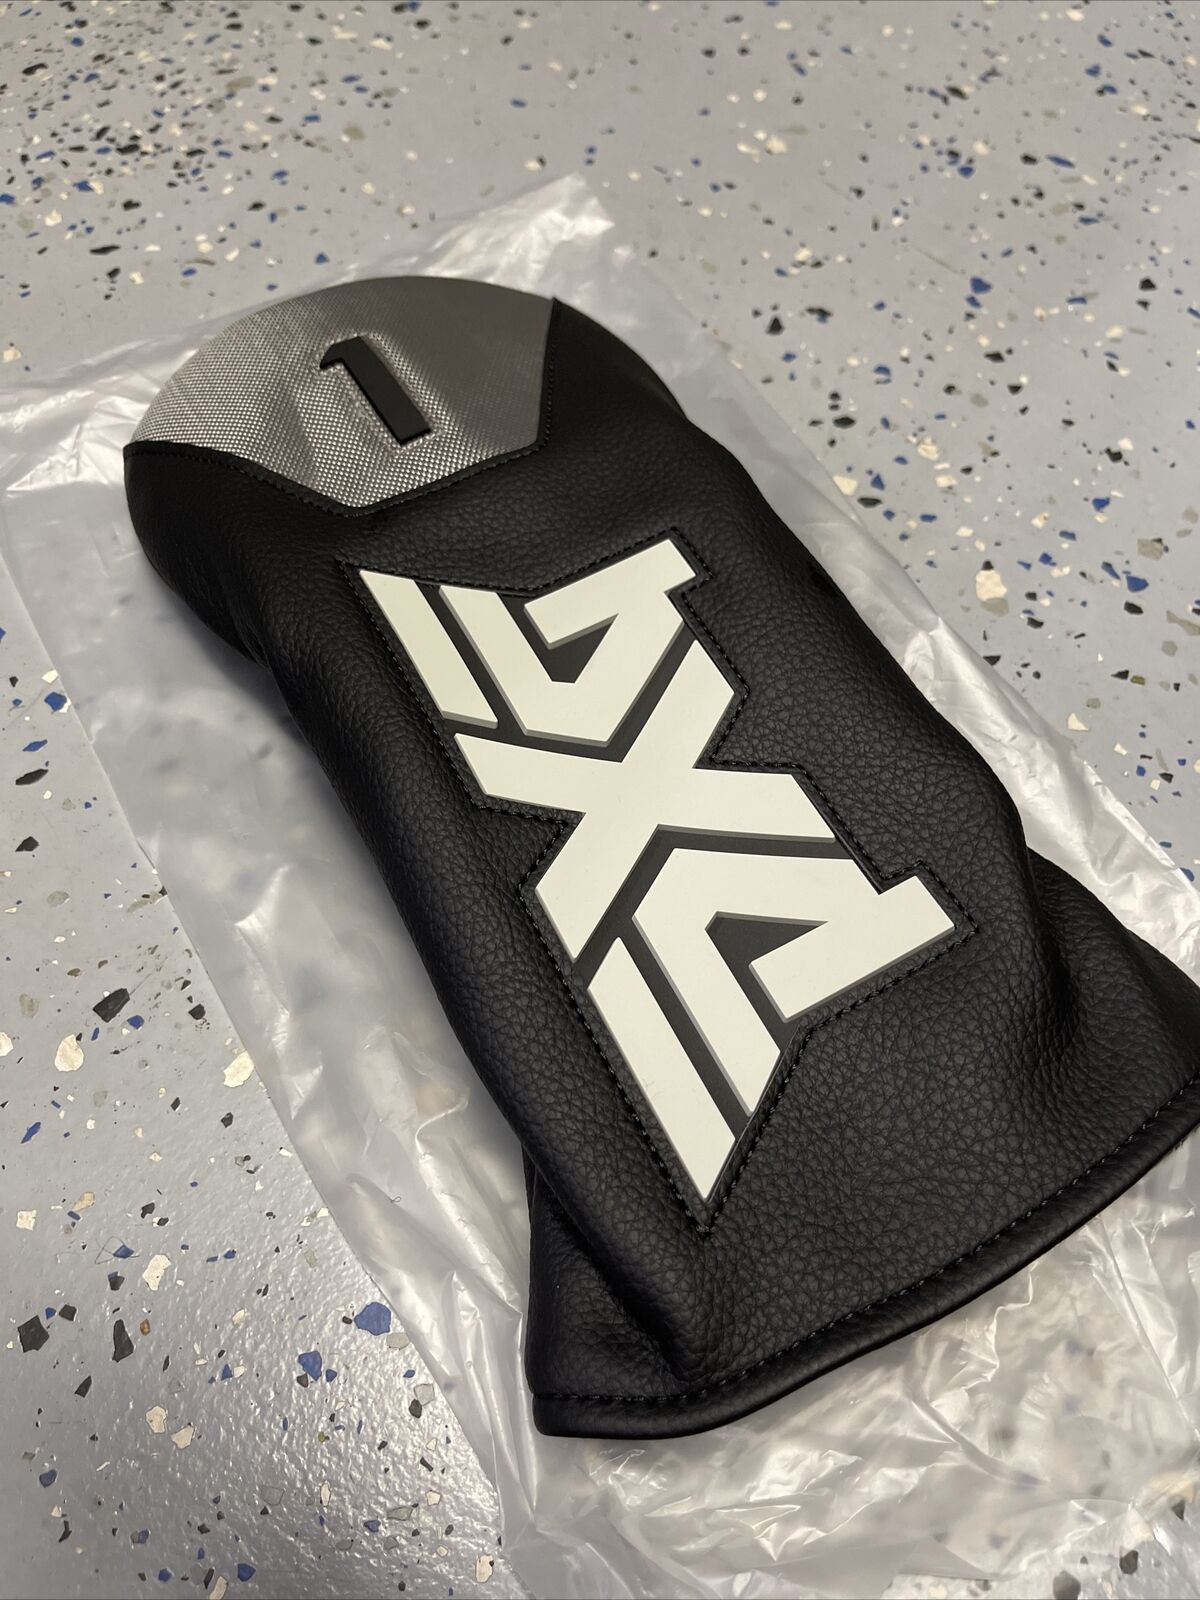 PXG driver headcover NEW 